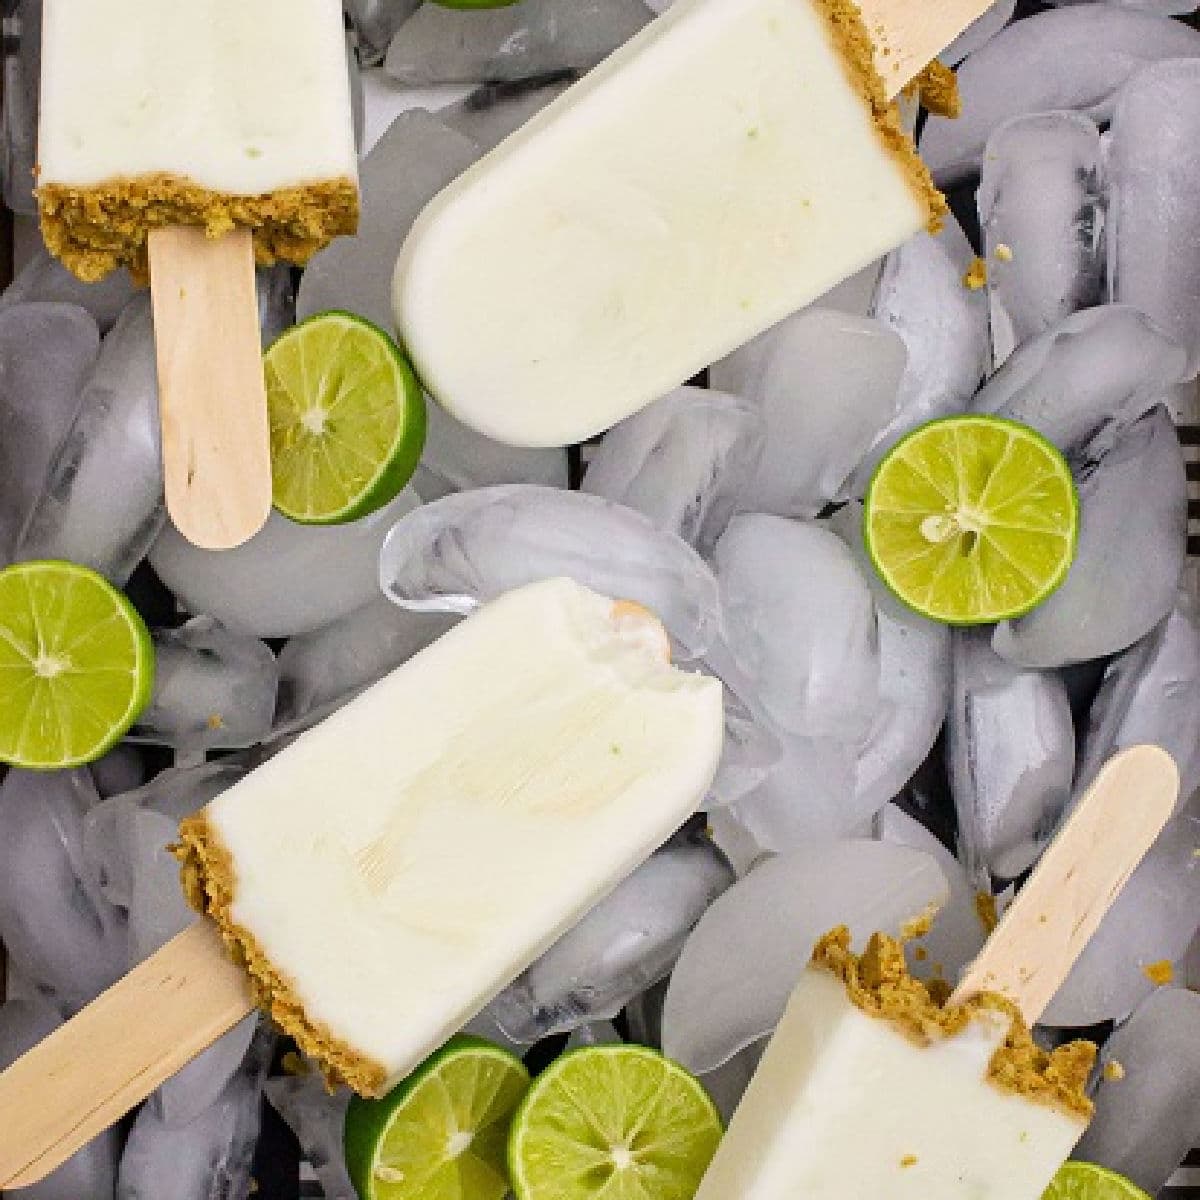 key lime pie popsicles laying on top of ice with slices of limes scattered around and one with a bite taken out of it